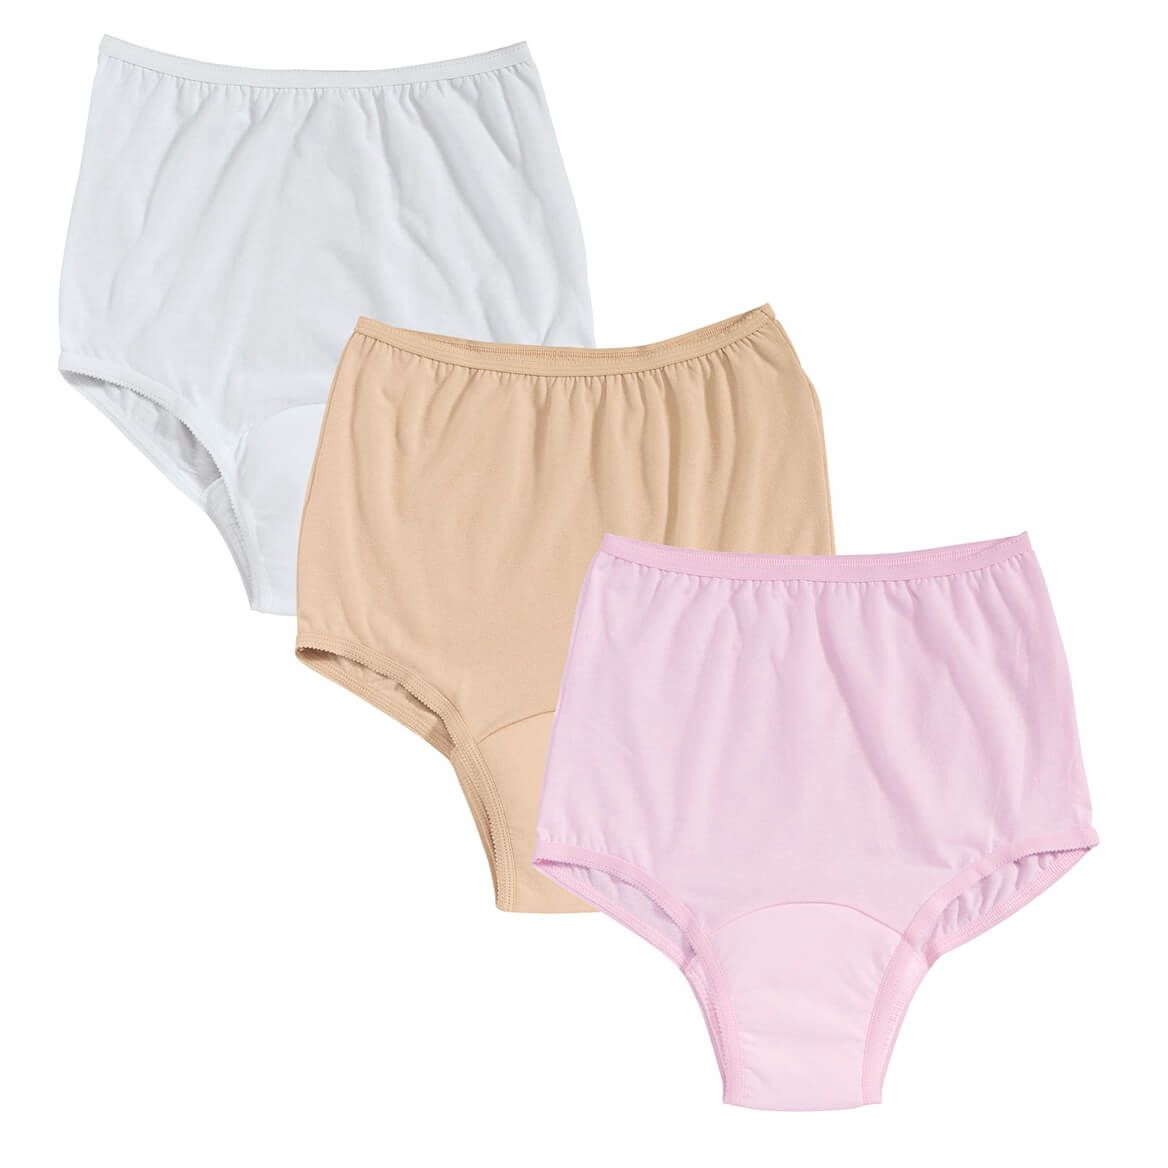 Women's 6 oz. Colored Incontinence Panties – 3-Pack